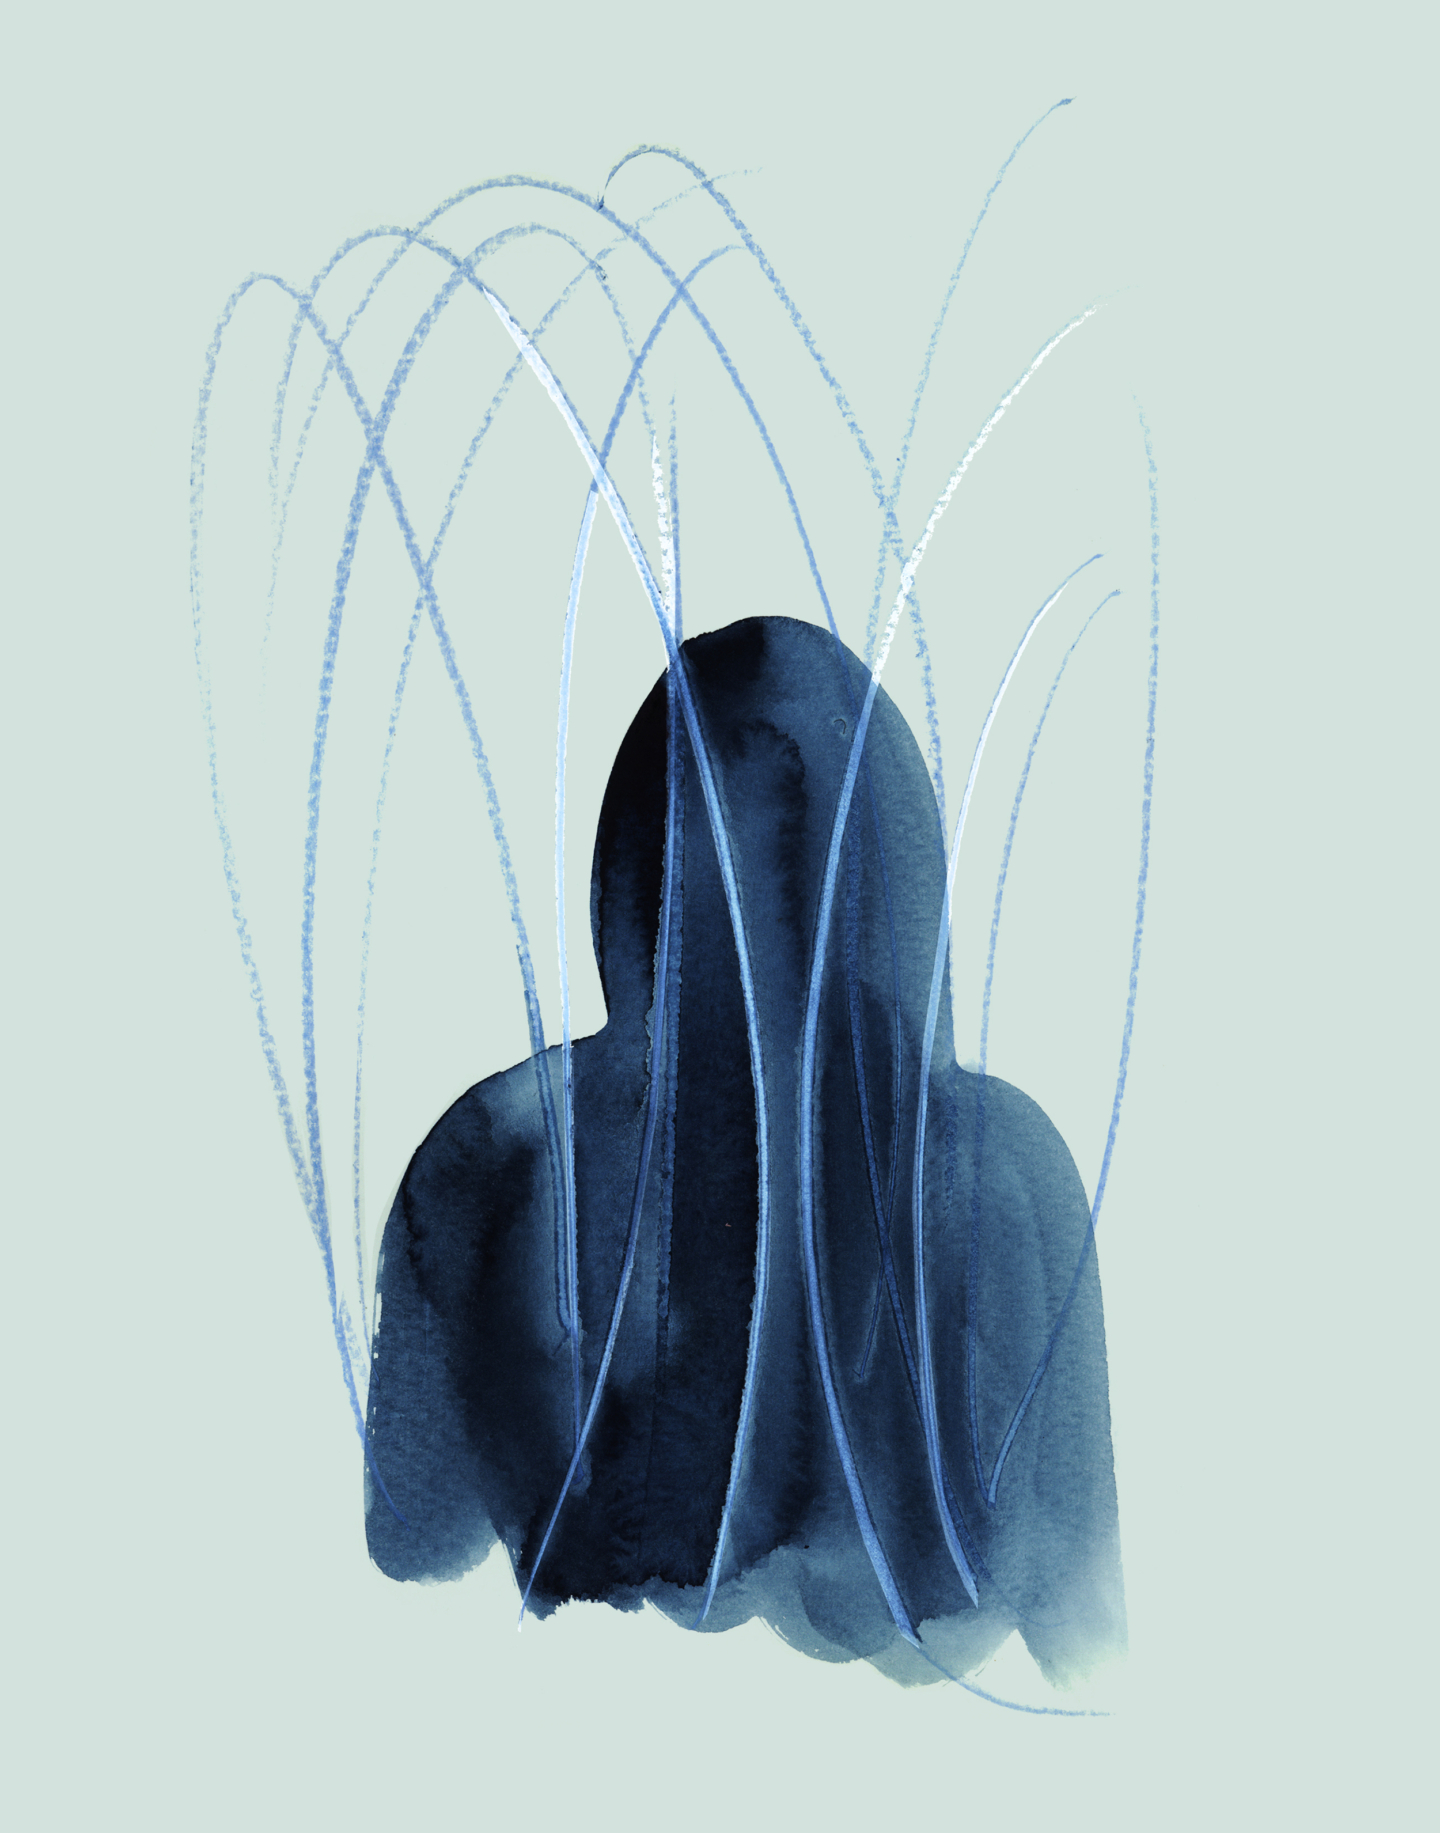 Illustration for addiction recovery app